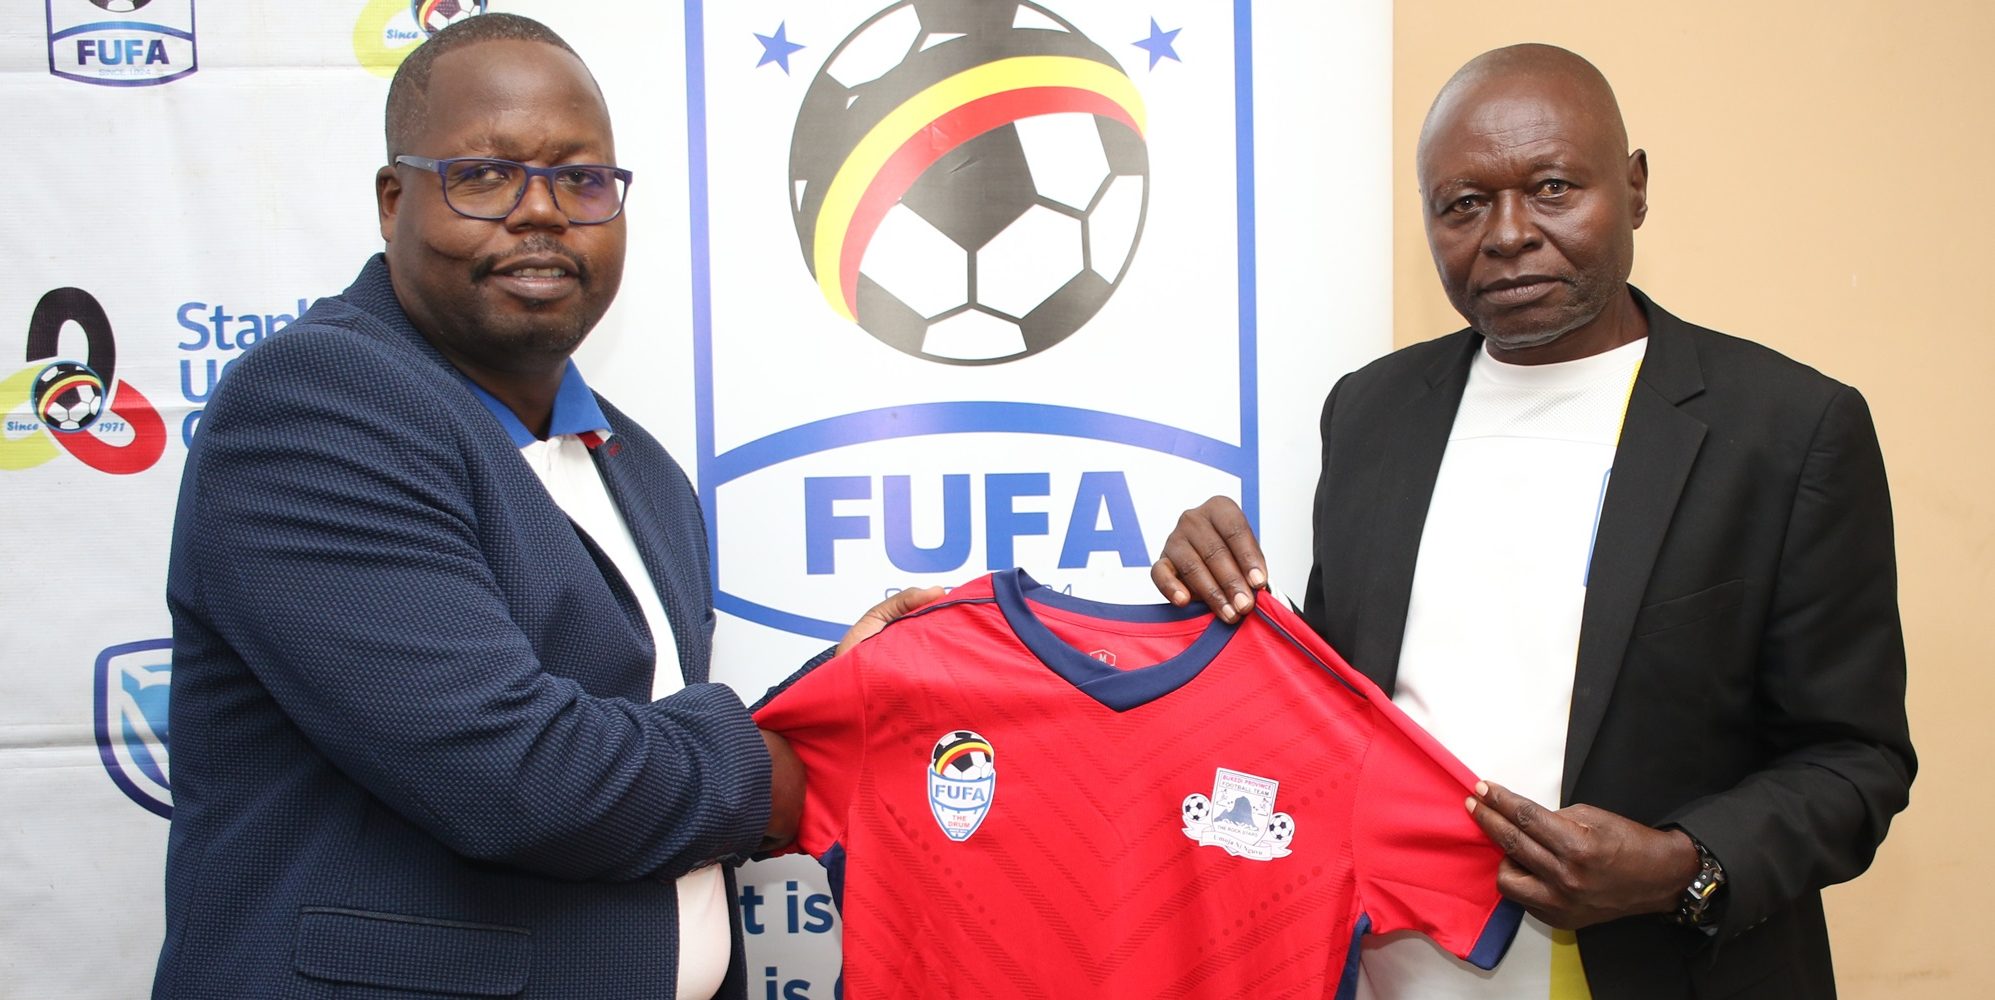 The FUFA Drum 2019: Official team jerseys handed over ahead of explosive Match Day 2